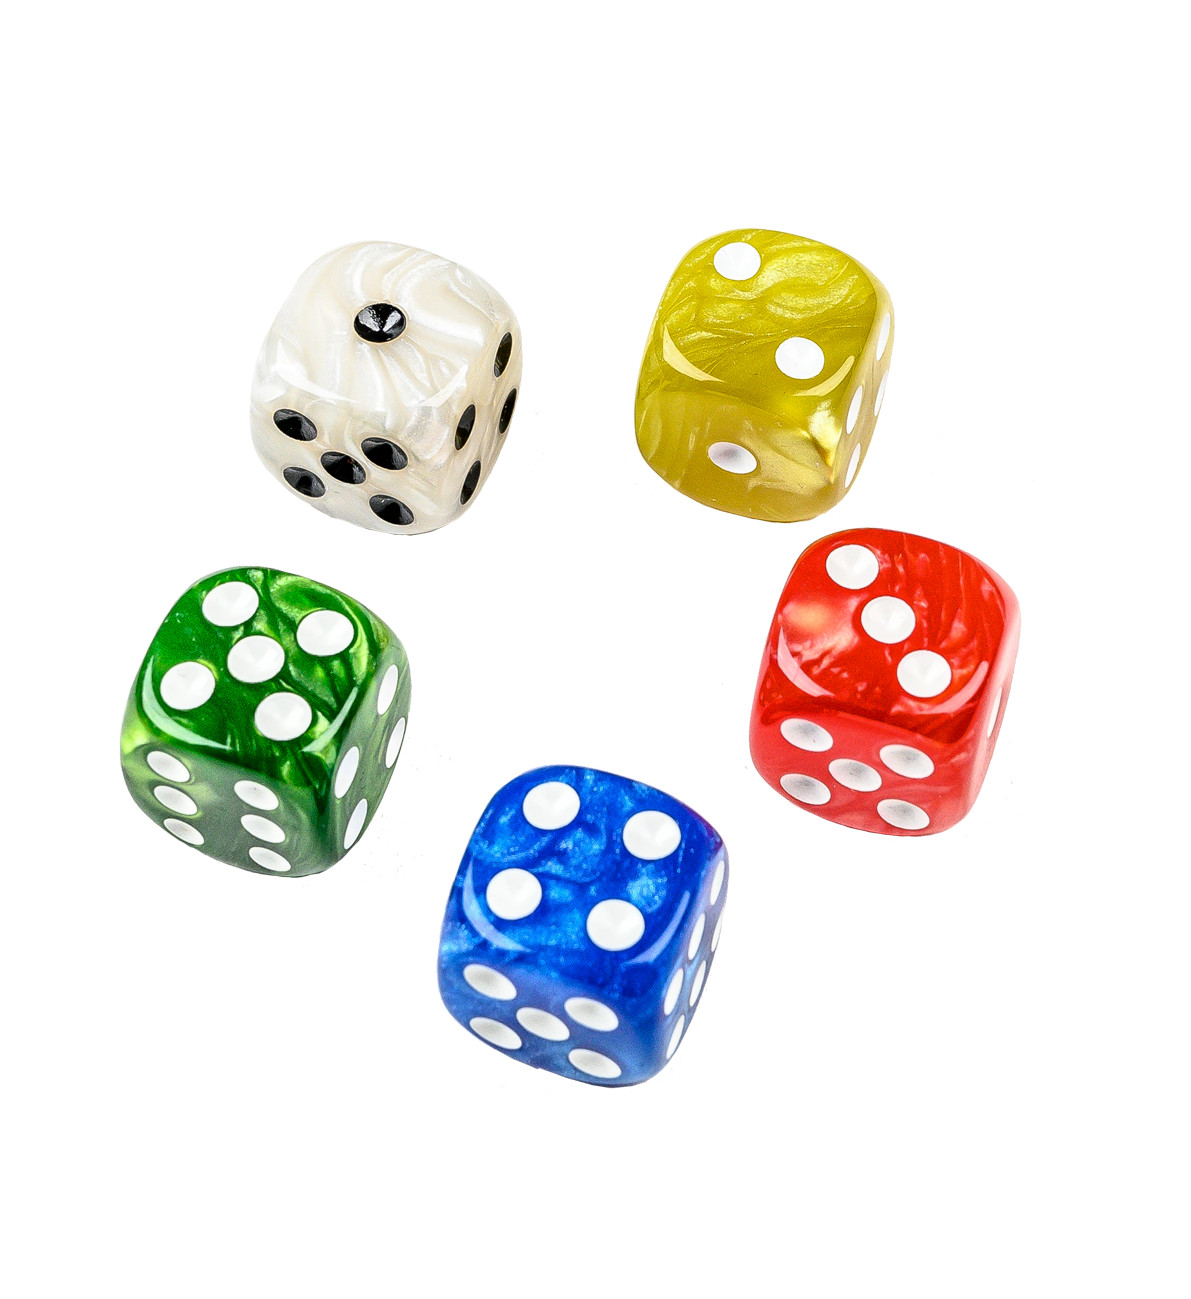 Dice, 16mm pearl, 50er polybag